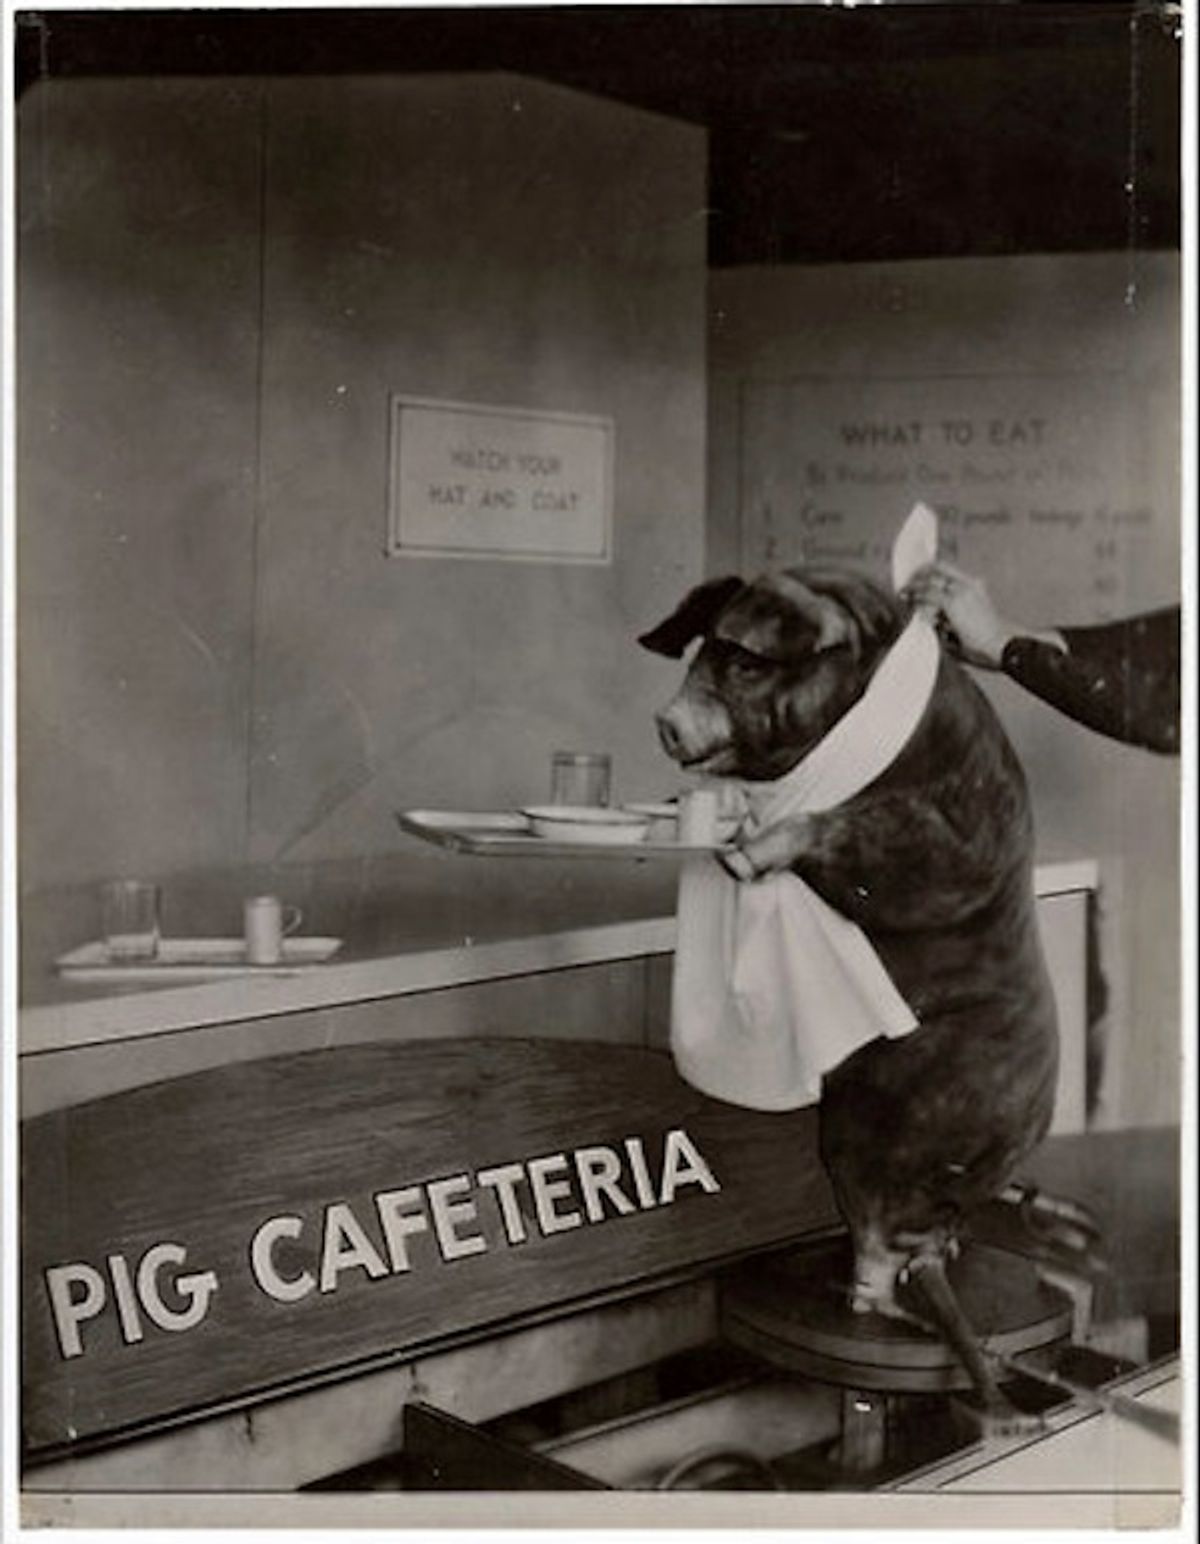 Government's attempts to explain healthy pig diet through motivational poster goes awry. 